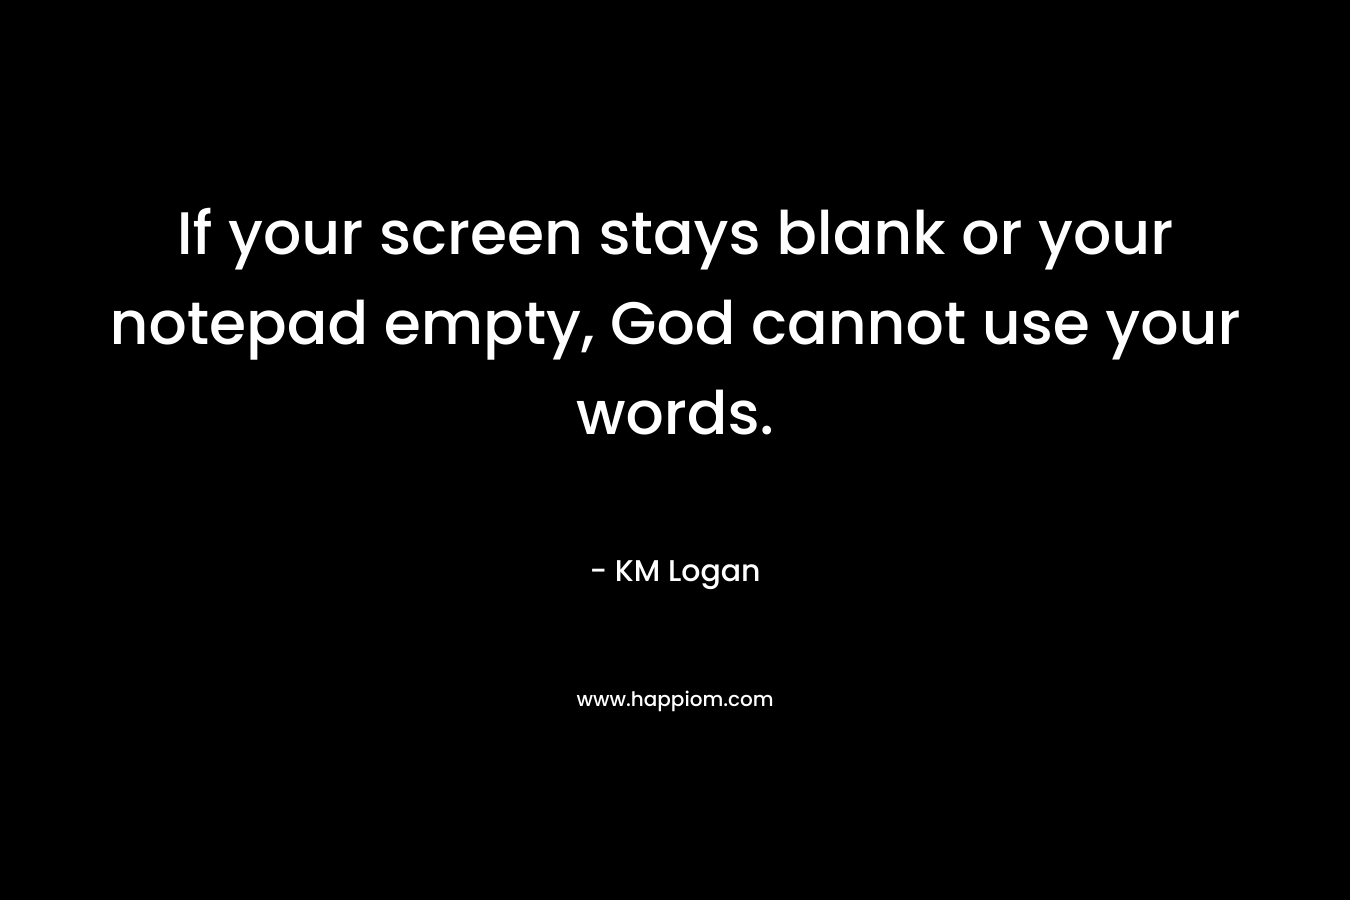 If your screen stays blank or your notepad empty, God cannot use your words. – KM Logan